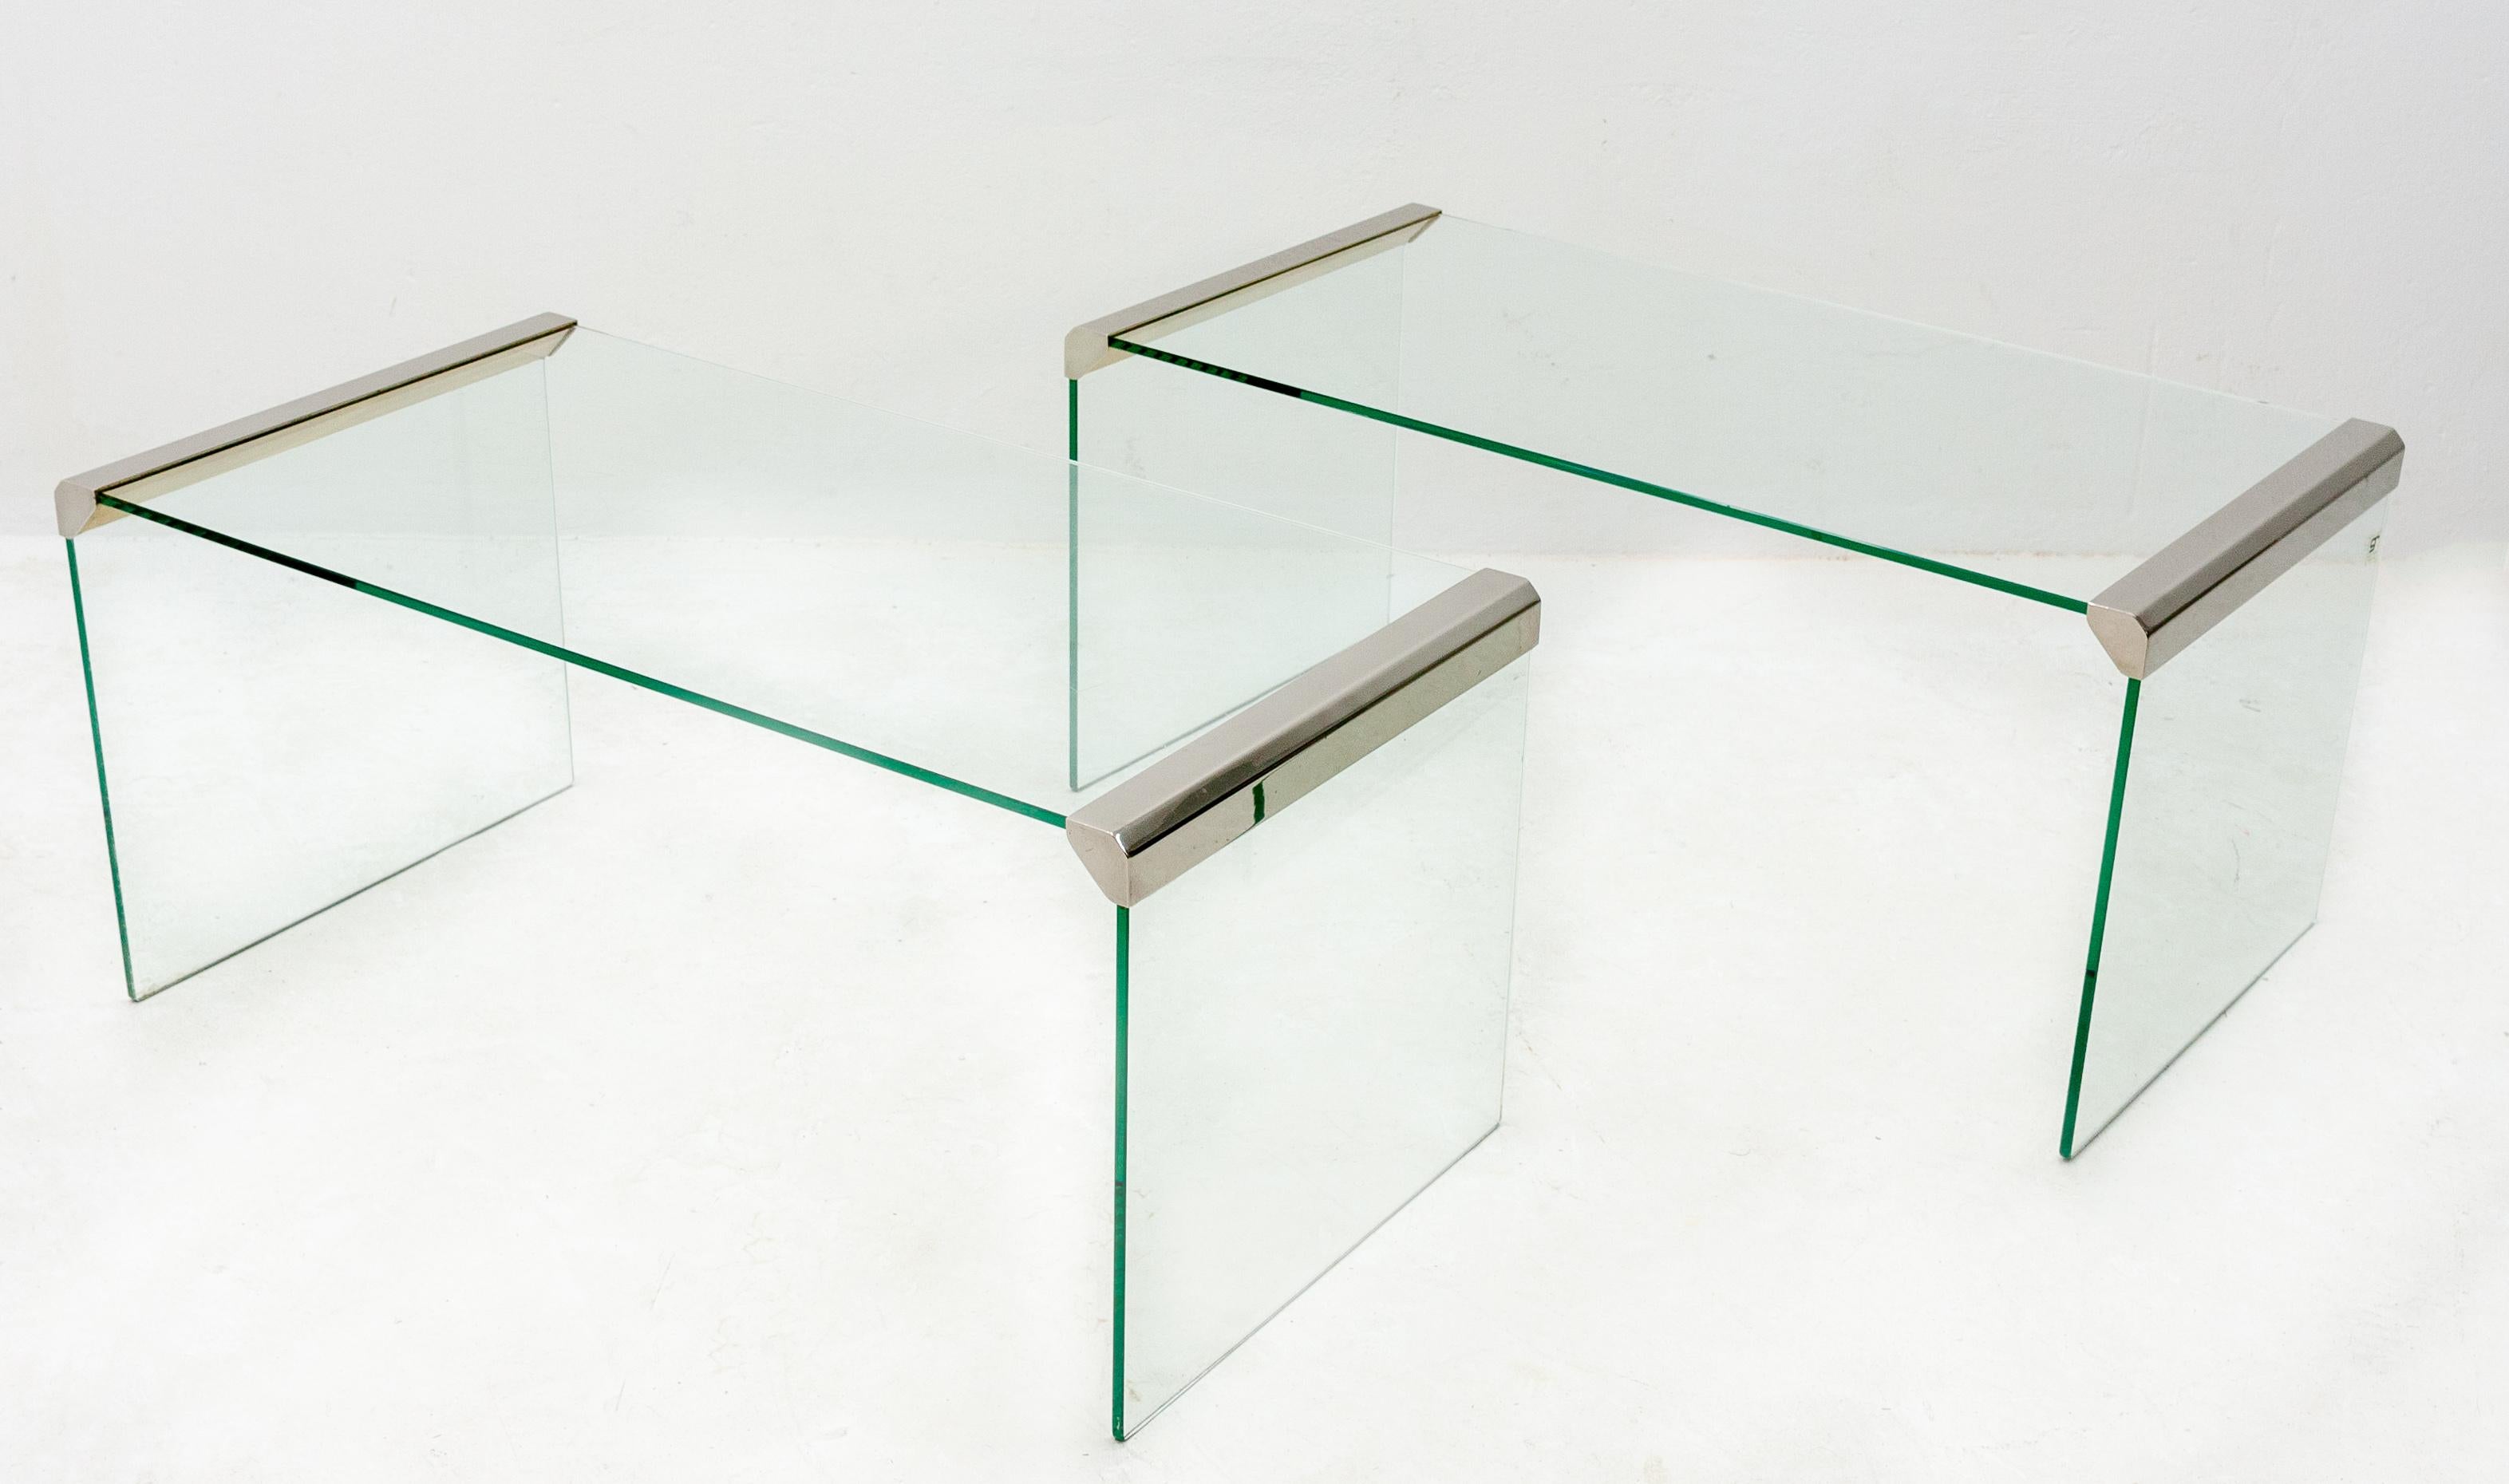 Very nice set of glass side tables, made by Galotti & Radice, Italy, 1970s. Tempered glass with chromed stainless steel corners.
Very good condition.